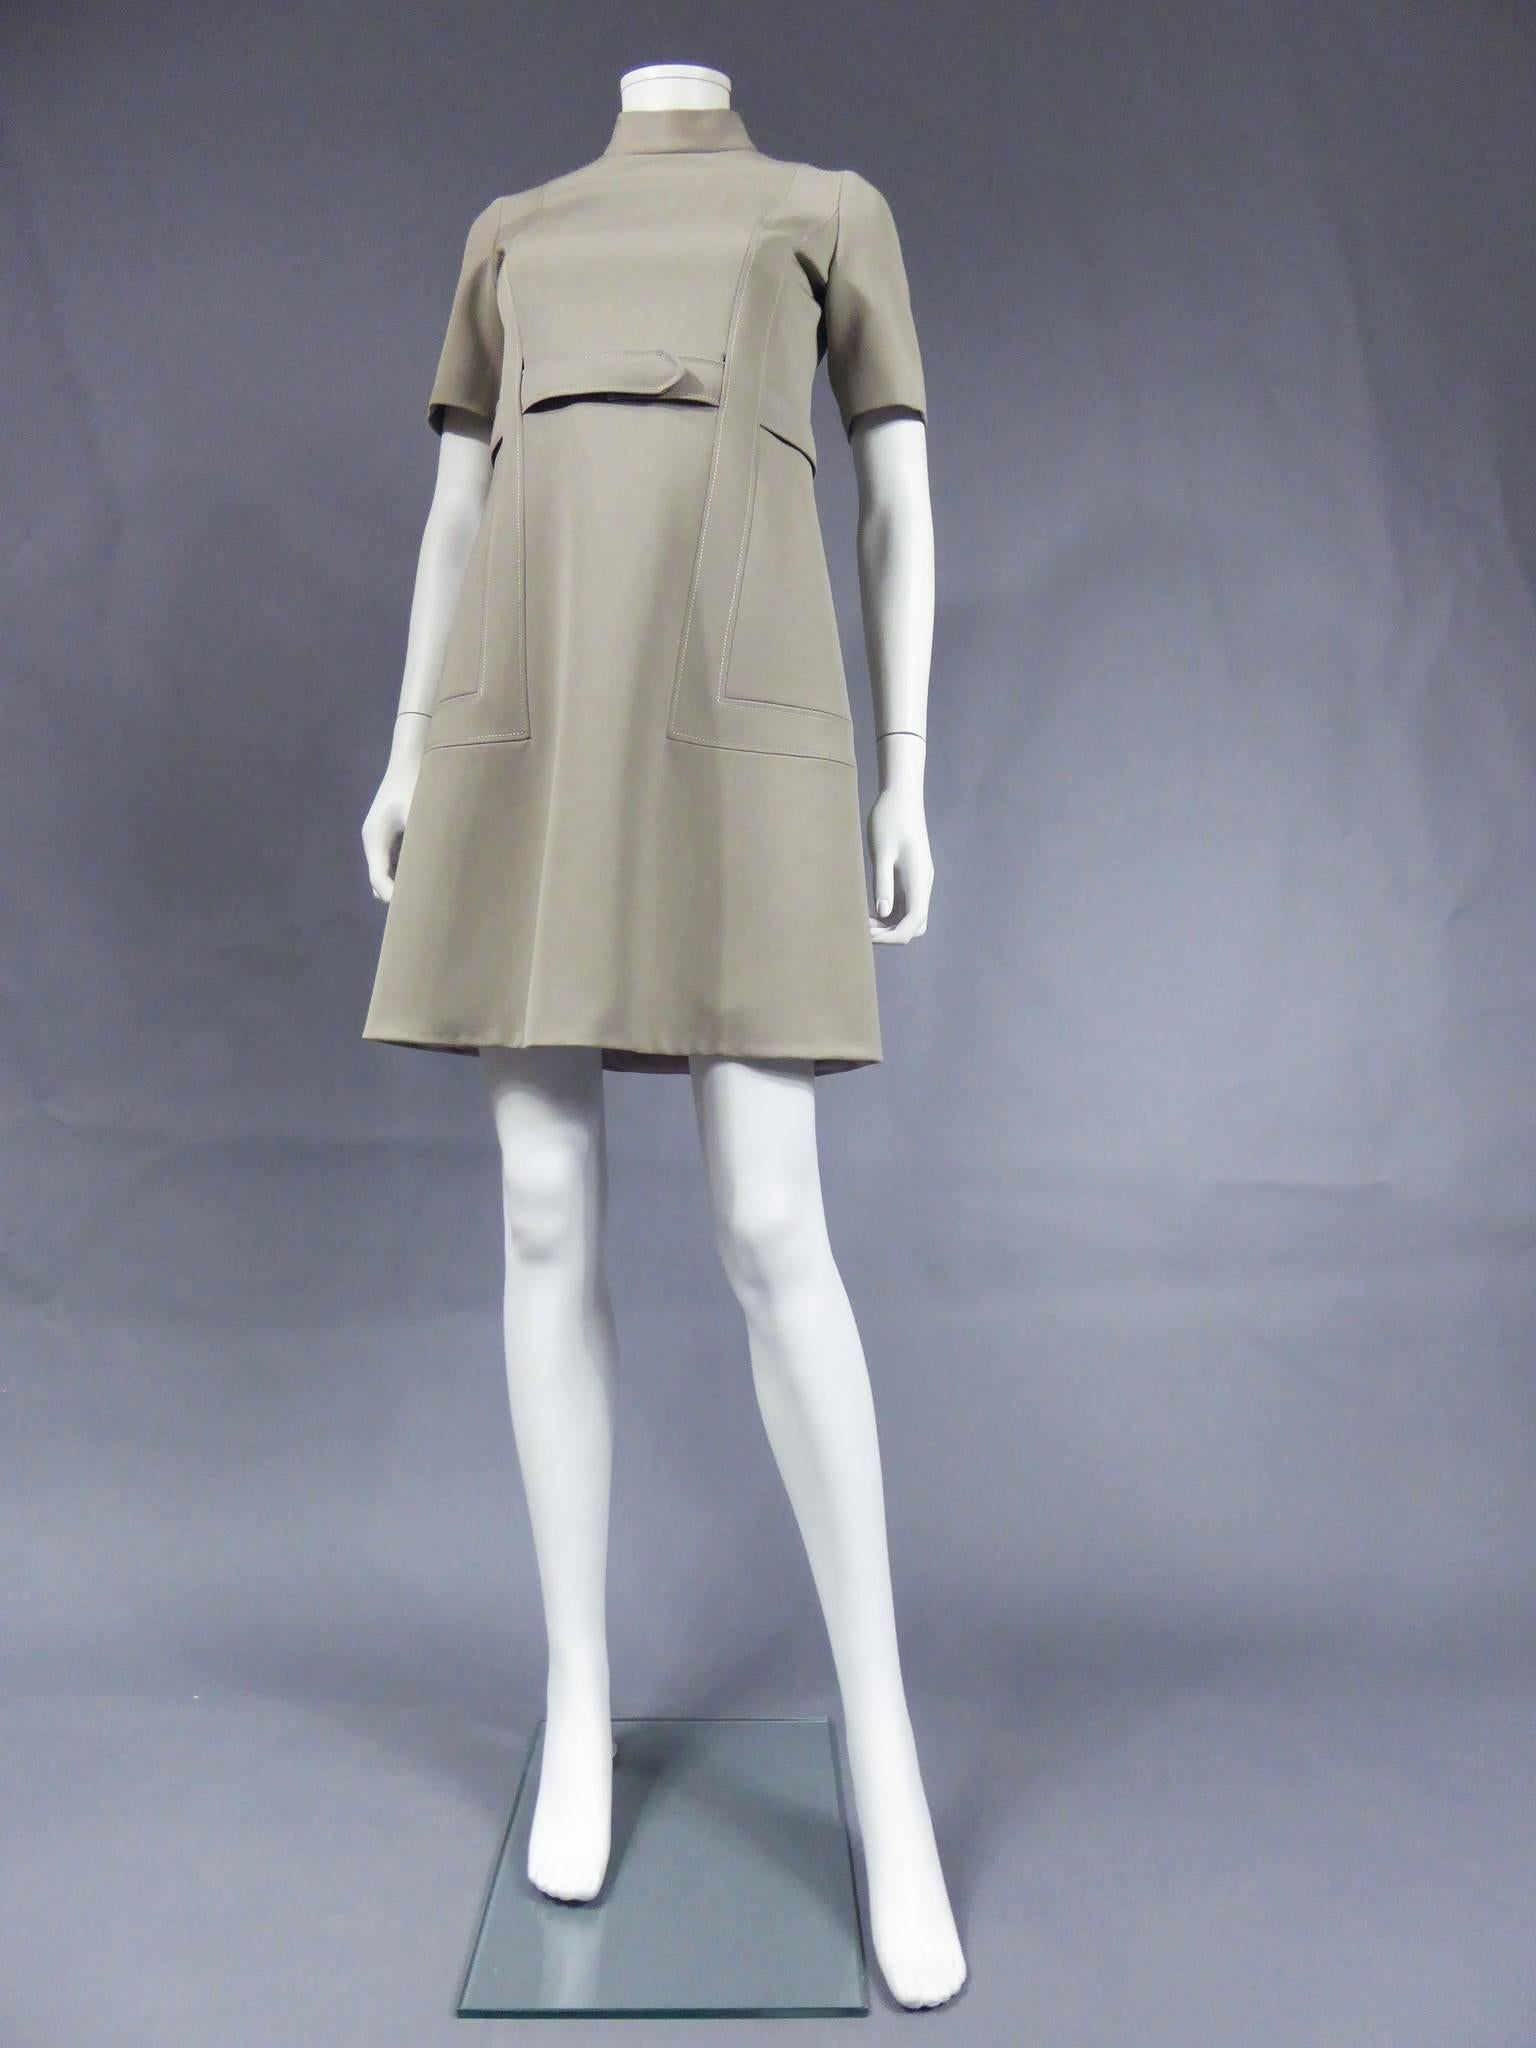 Circa 1968

France

Ted Lapidus by Olivier Lapidus ensemble in mastic color consisting of a dress and a coat. Dress with short sleeves and small collar. Powder pink lining in nylon. Belt closed by two snap buttons couture finishes. Graphic seam on